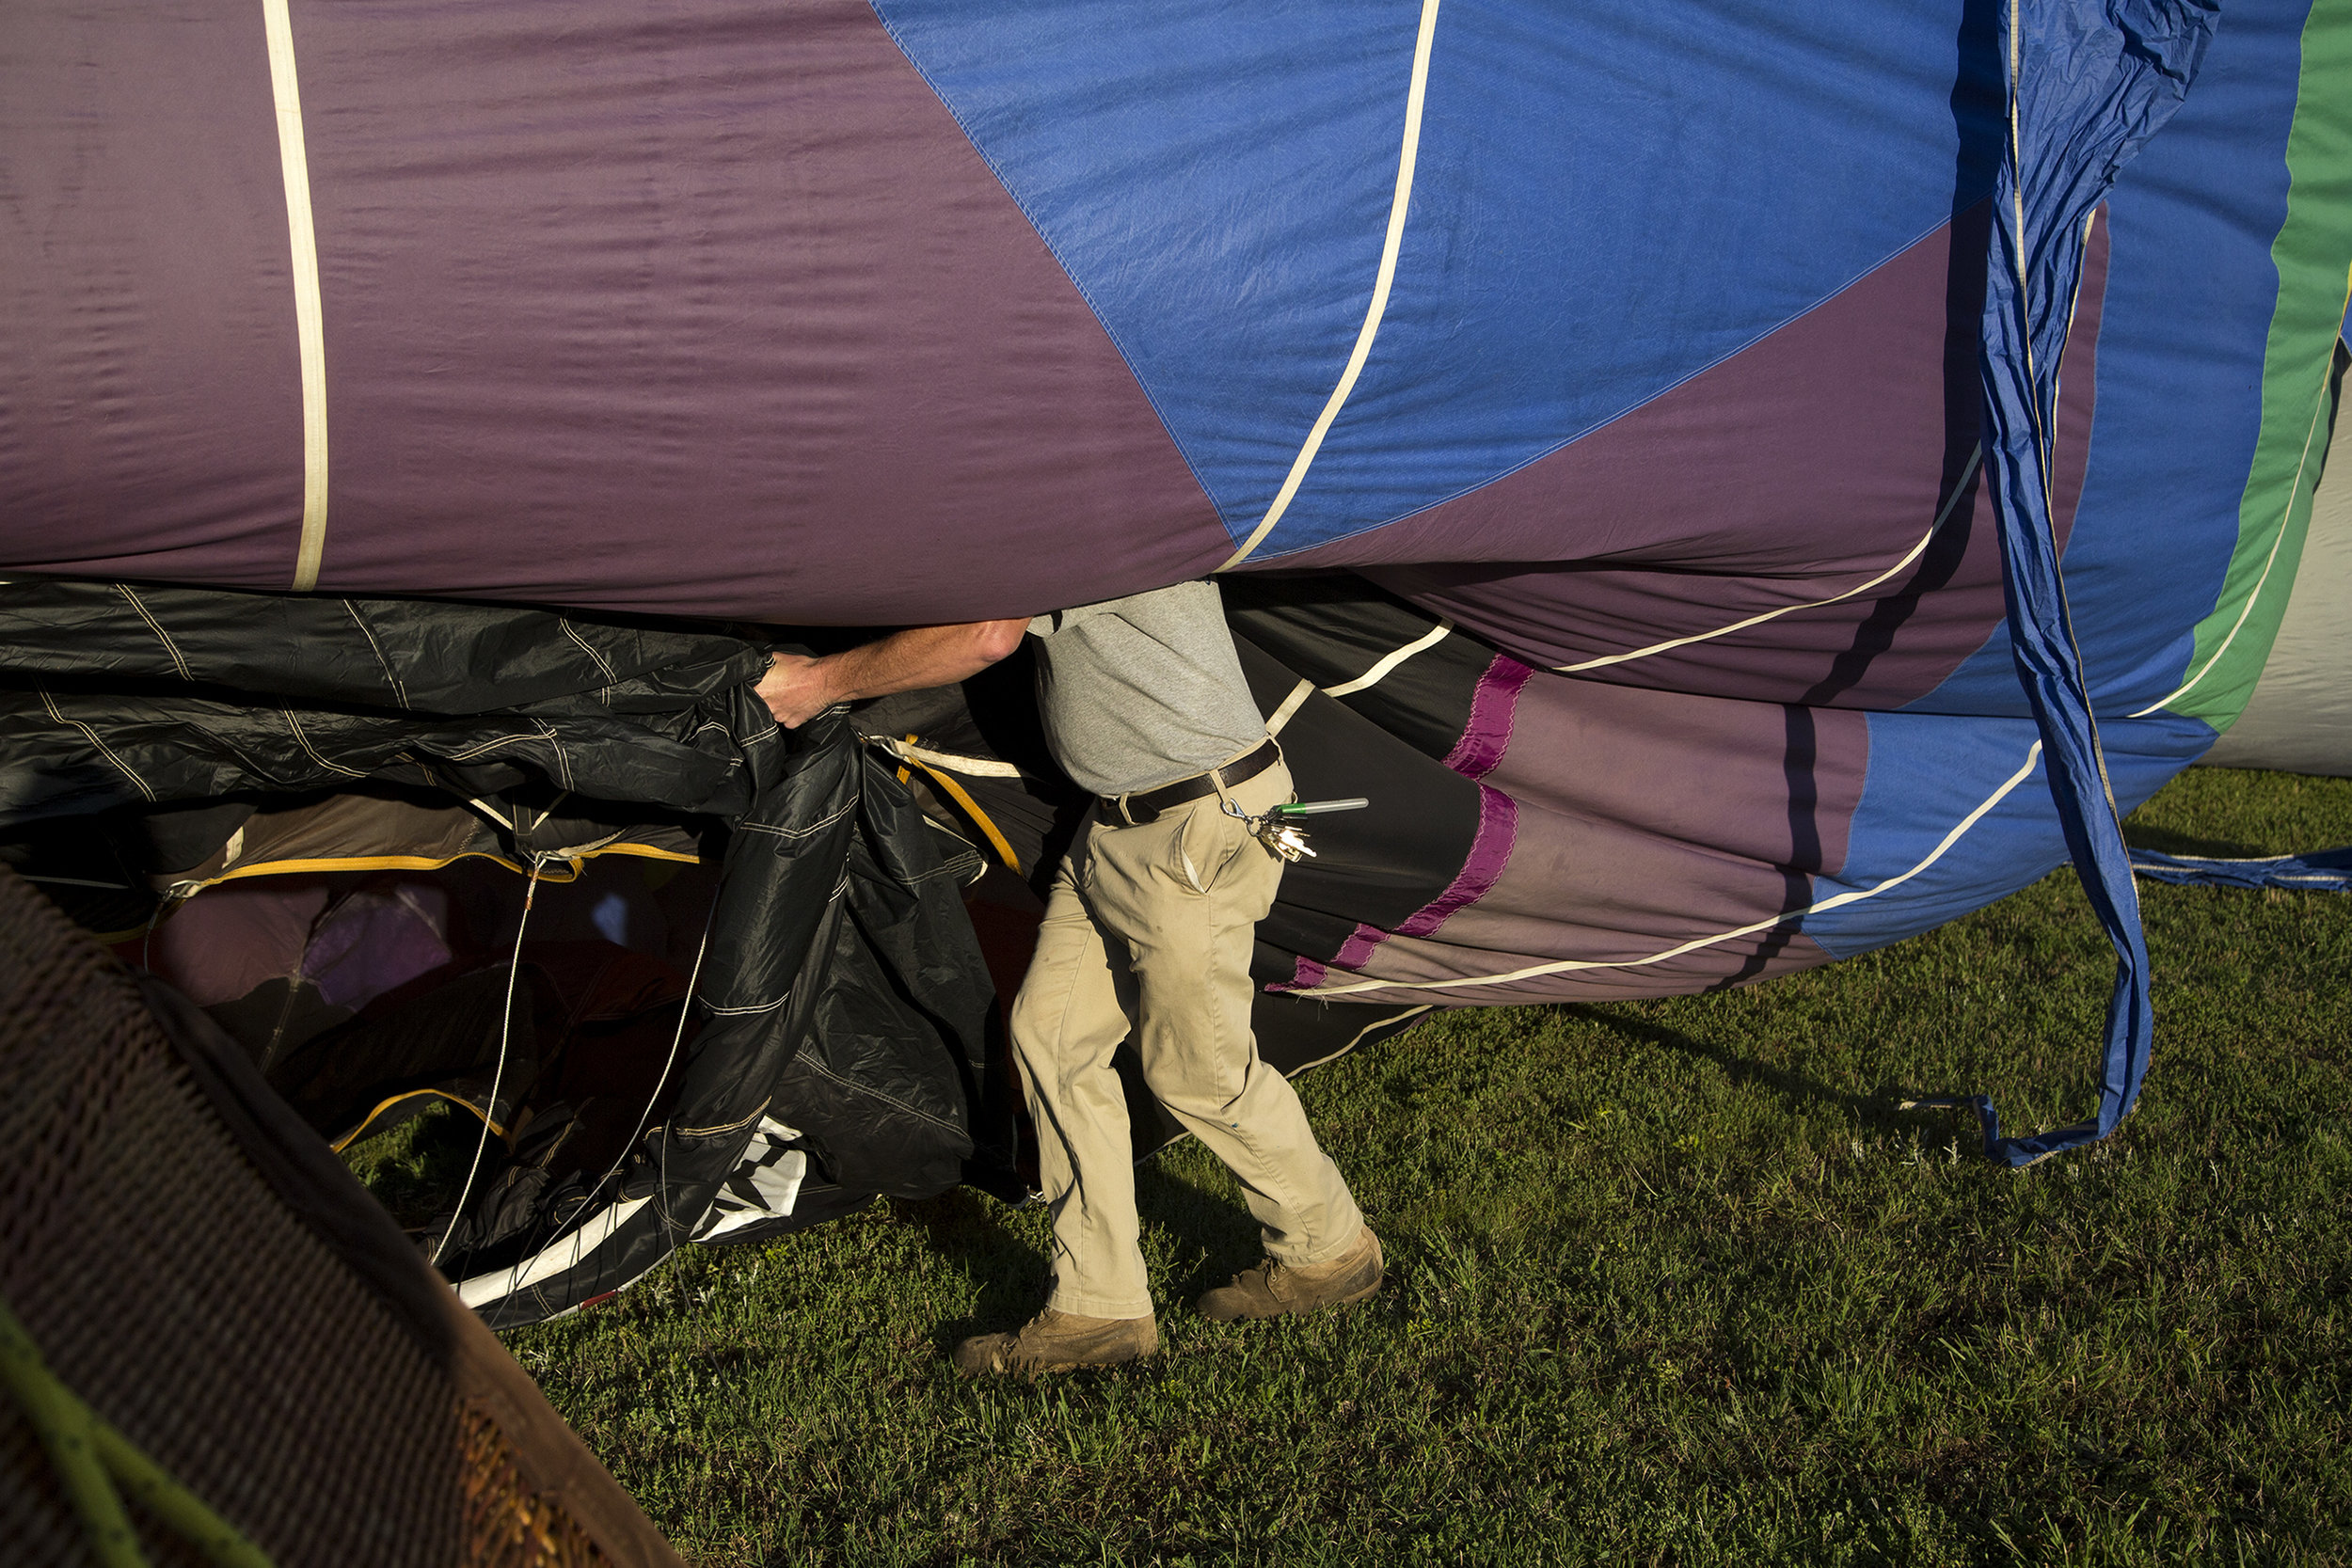  Luke Mason, a ground crew chief for Coastal Balloons, holds the opening of the Spectrum hot air balloon as it inflates before an early morning flight on June 4, 2019. 